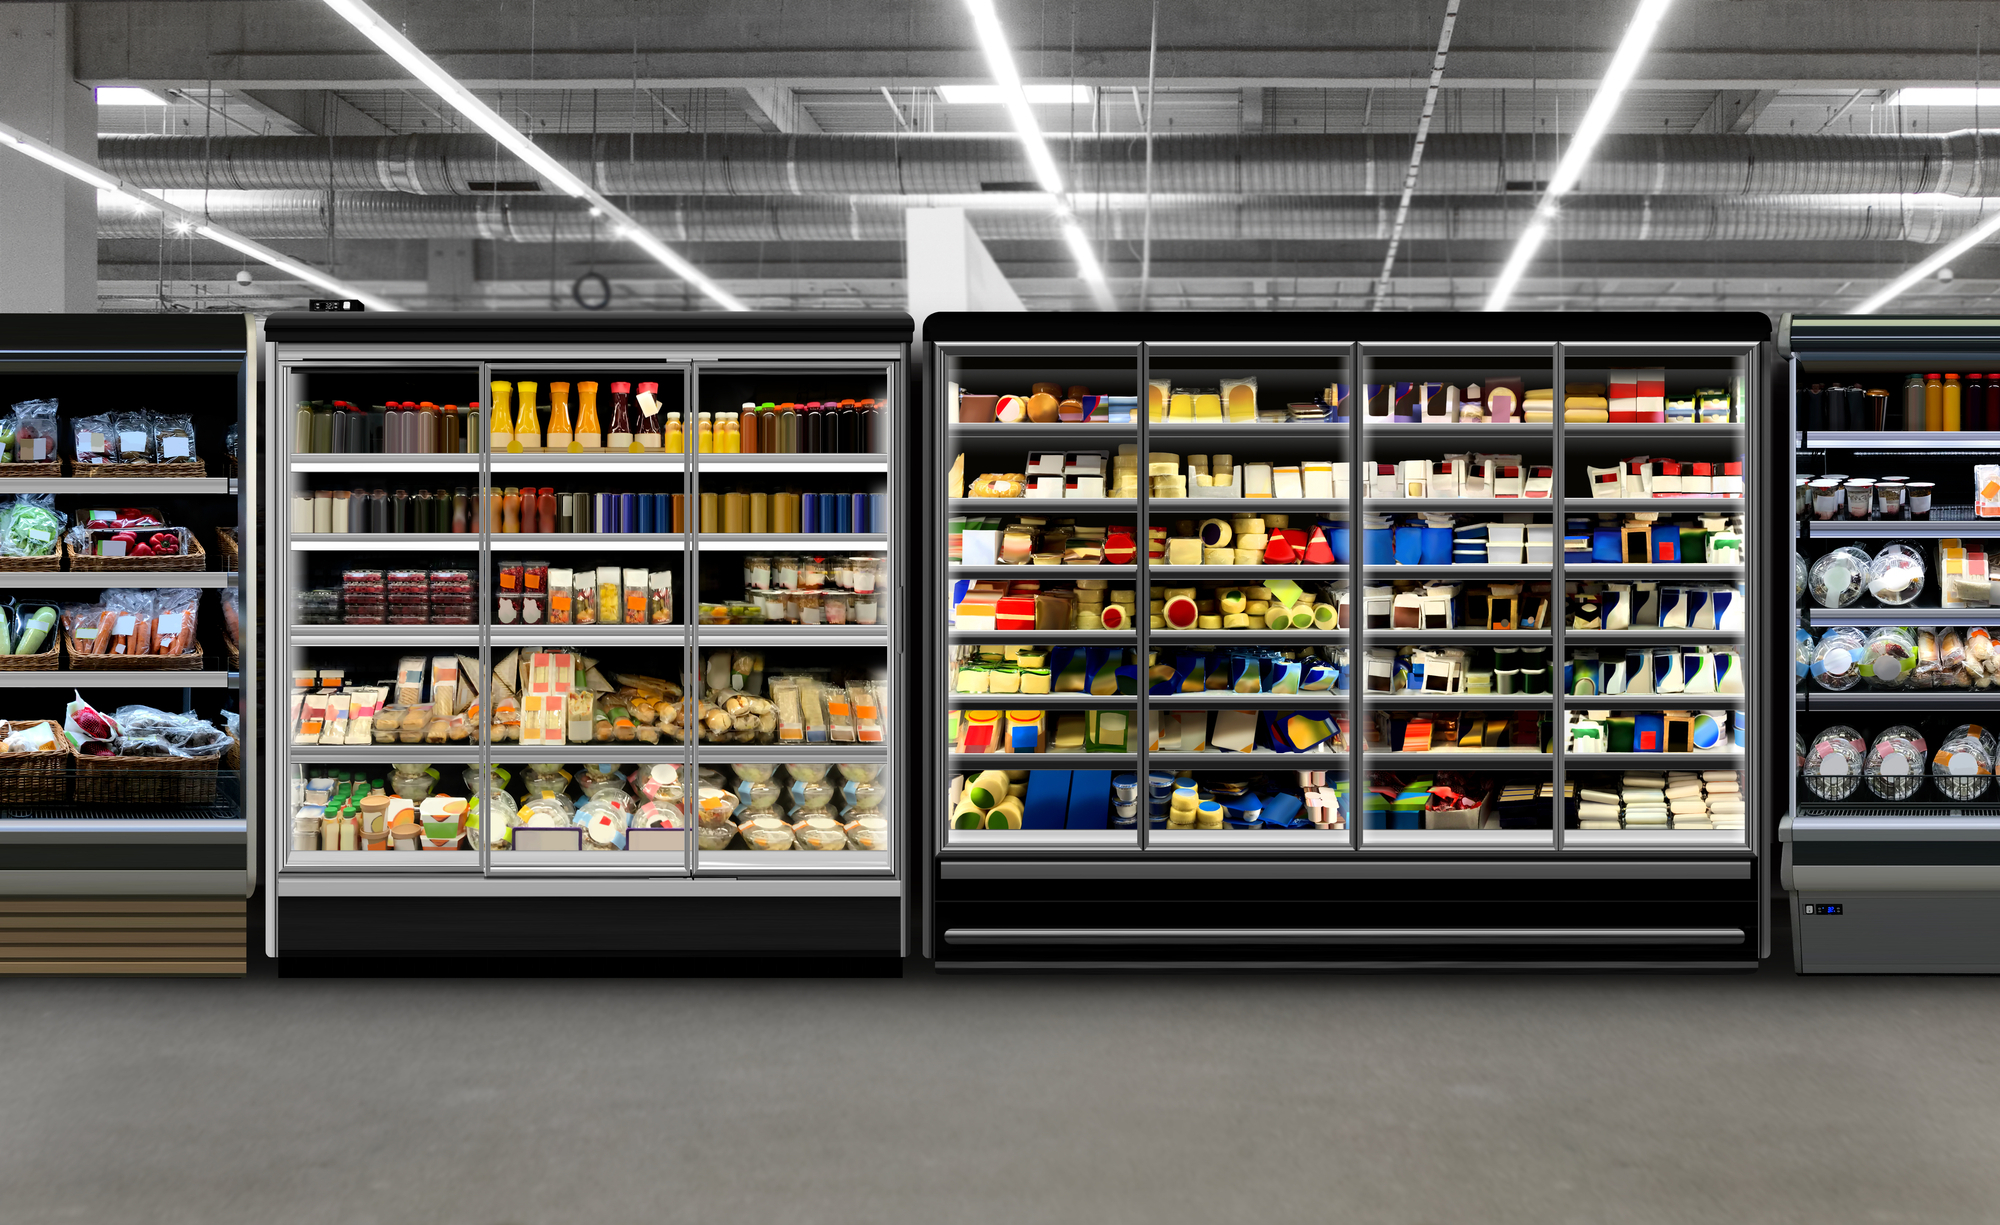 Commercial refrigerated display case